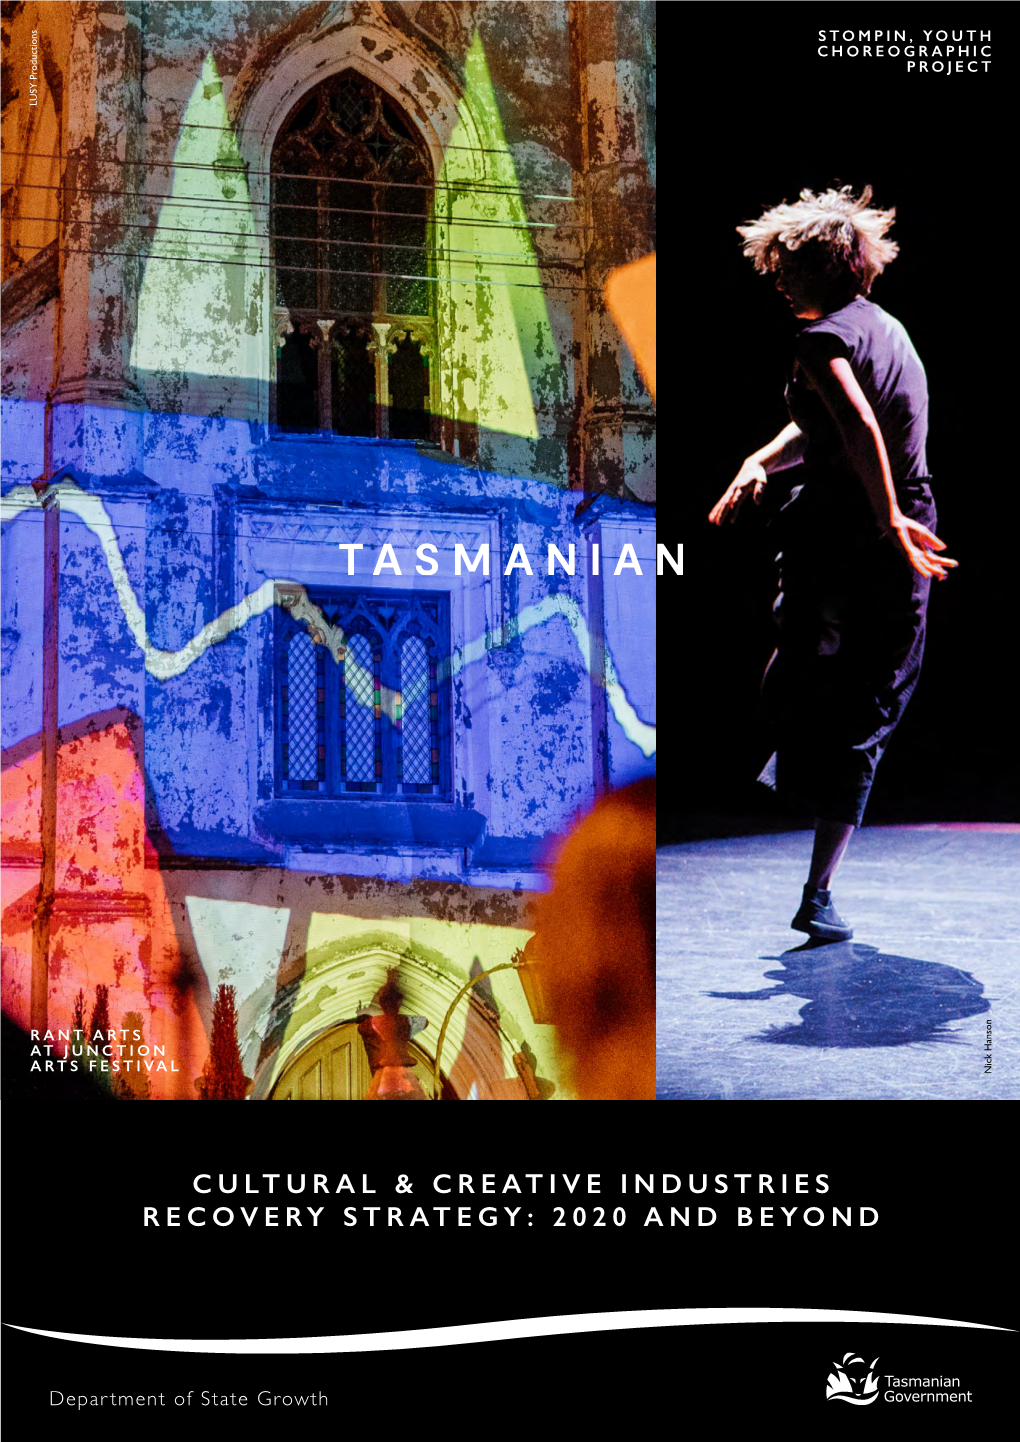 Cultural and Creative Industries Recovery Strategy: 2020 and Beyond